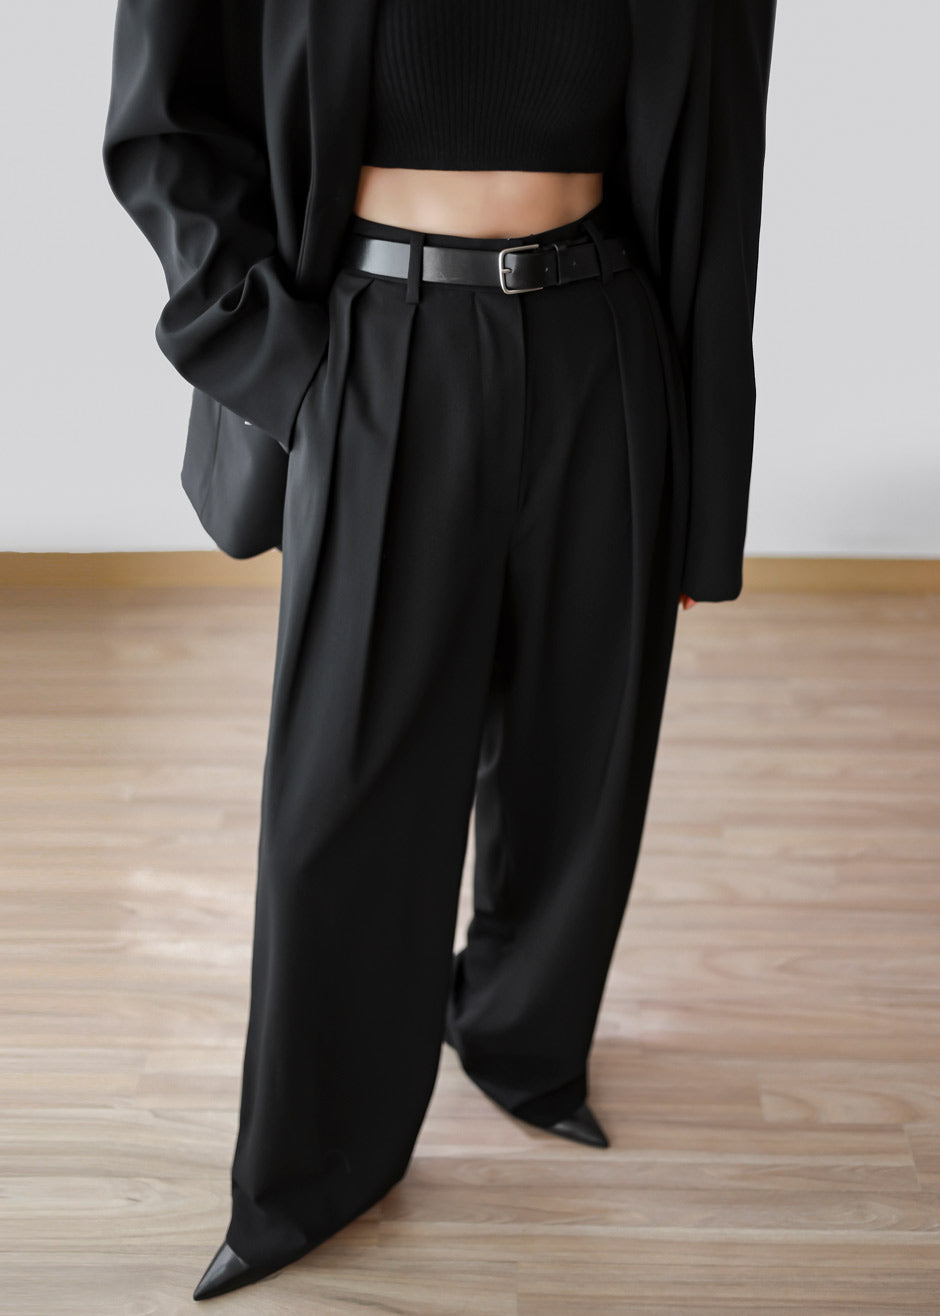 https://cdn.shopify.com/s/files/1/1527/0993/products/tansy-pleated-trousers-black-pants-the-frankie-shop-257133.jpg?v=1645832723&width=1380